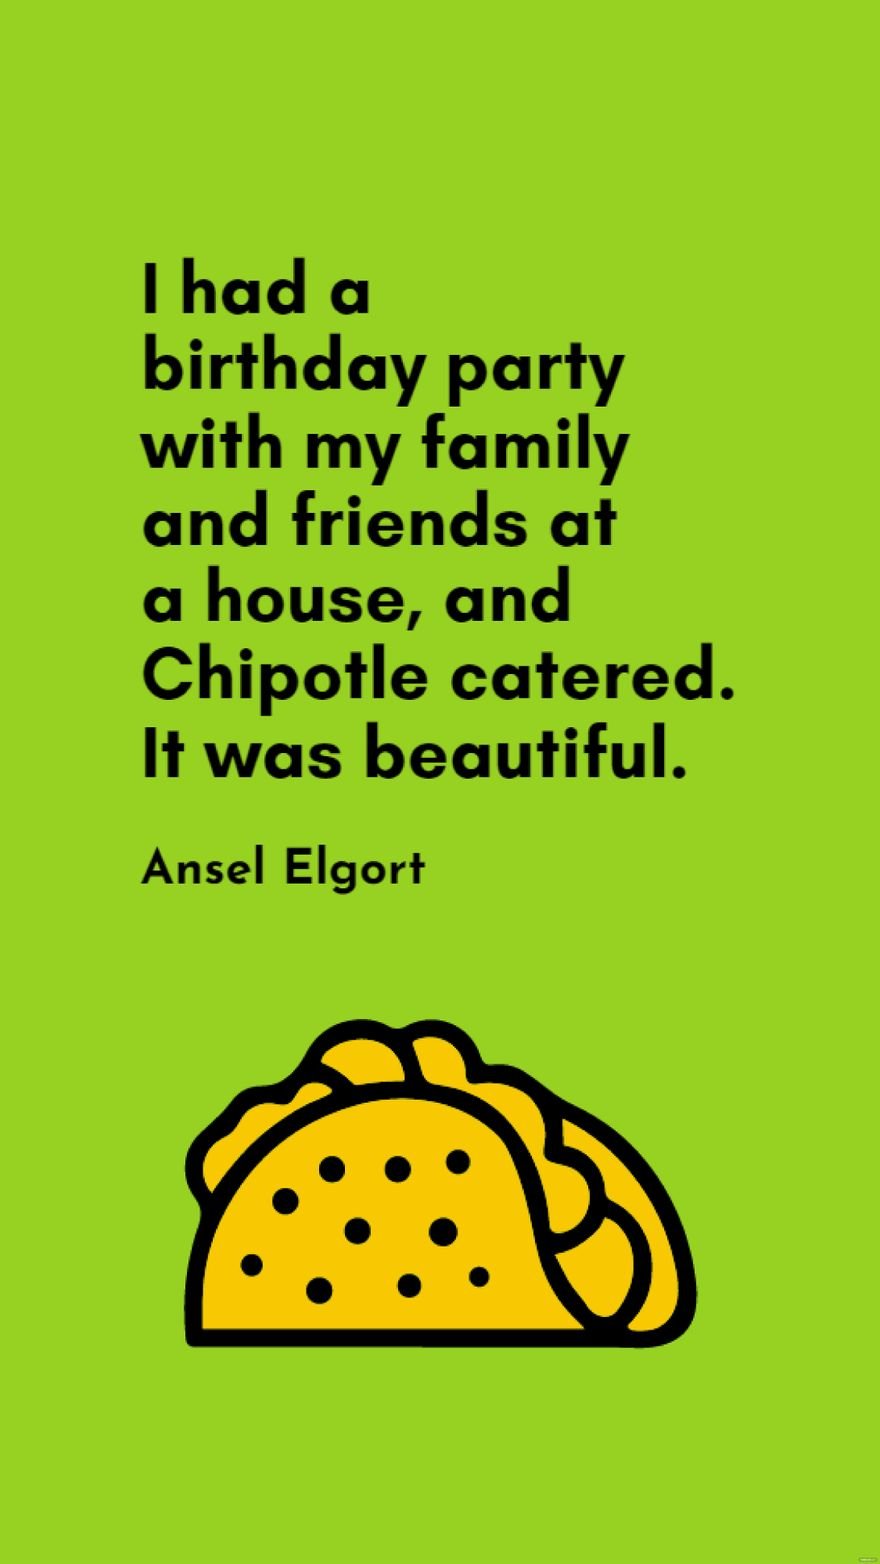 Free Ansel Elgort - I had a birthday party with my family and friends at a house, and Chipotle catered. It was beautiful. in JPG